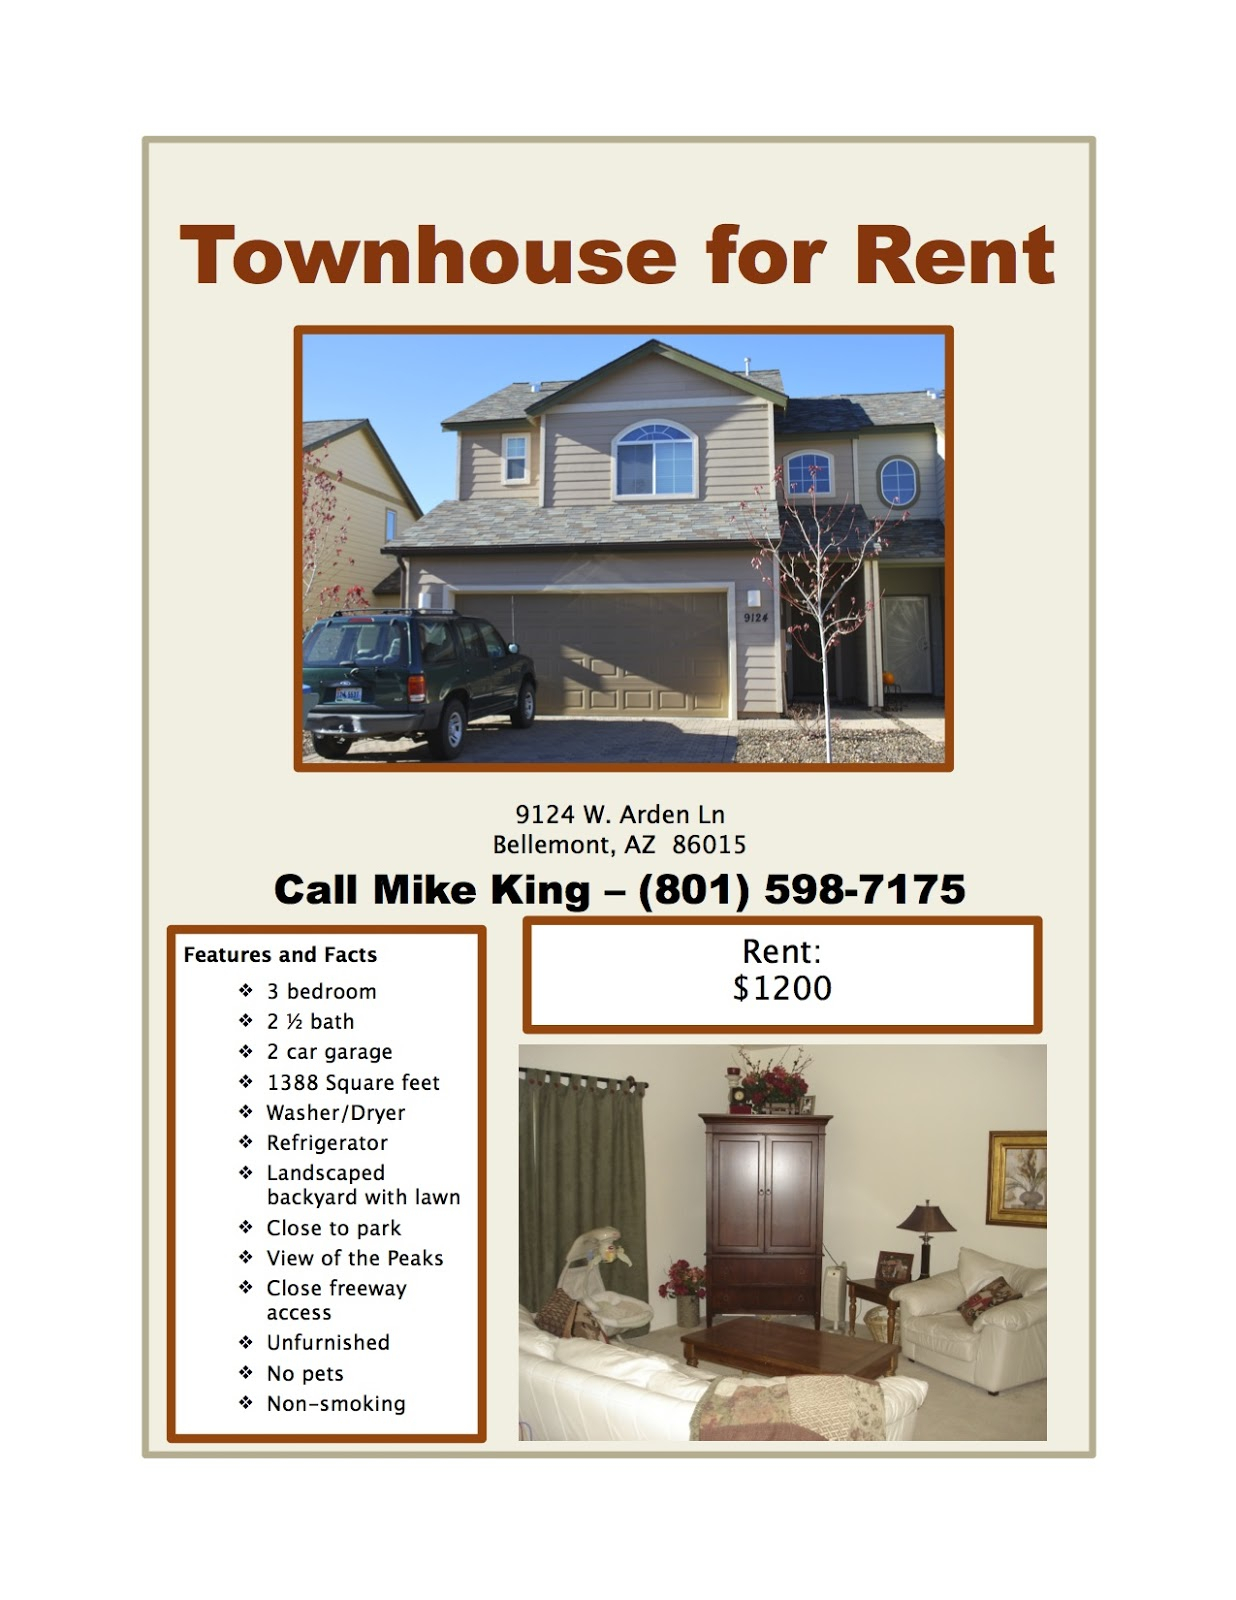 House For Rent Flyer Template Accommodation > Rental Houses With House For Rent Flyer Template Free